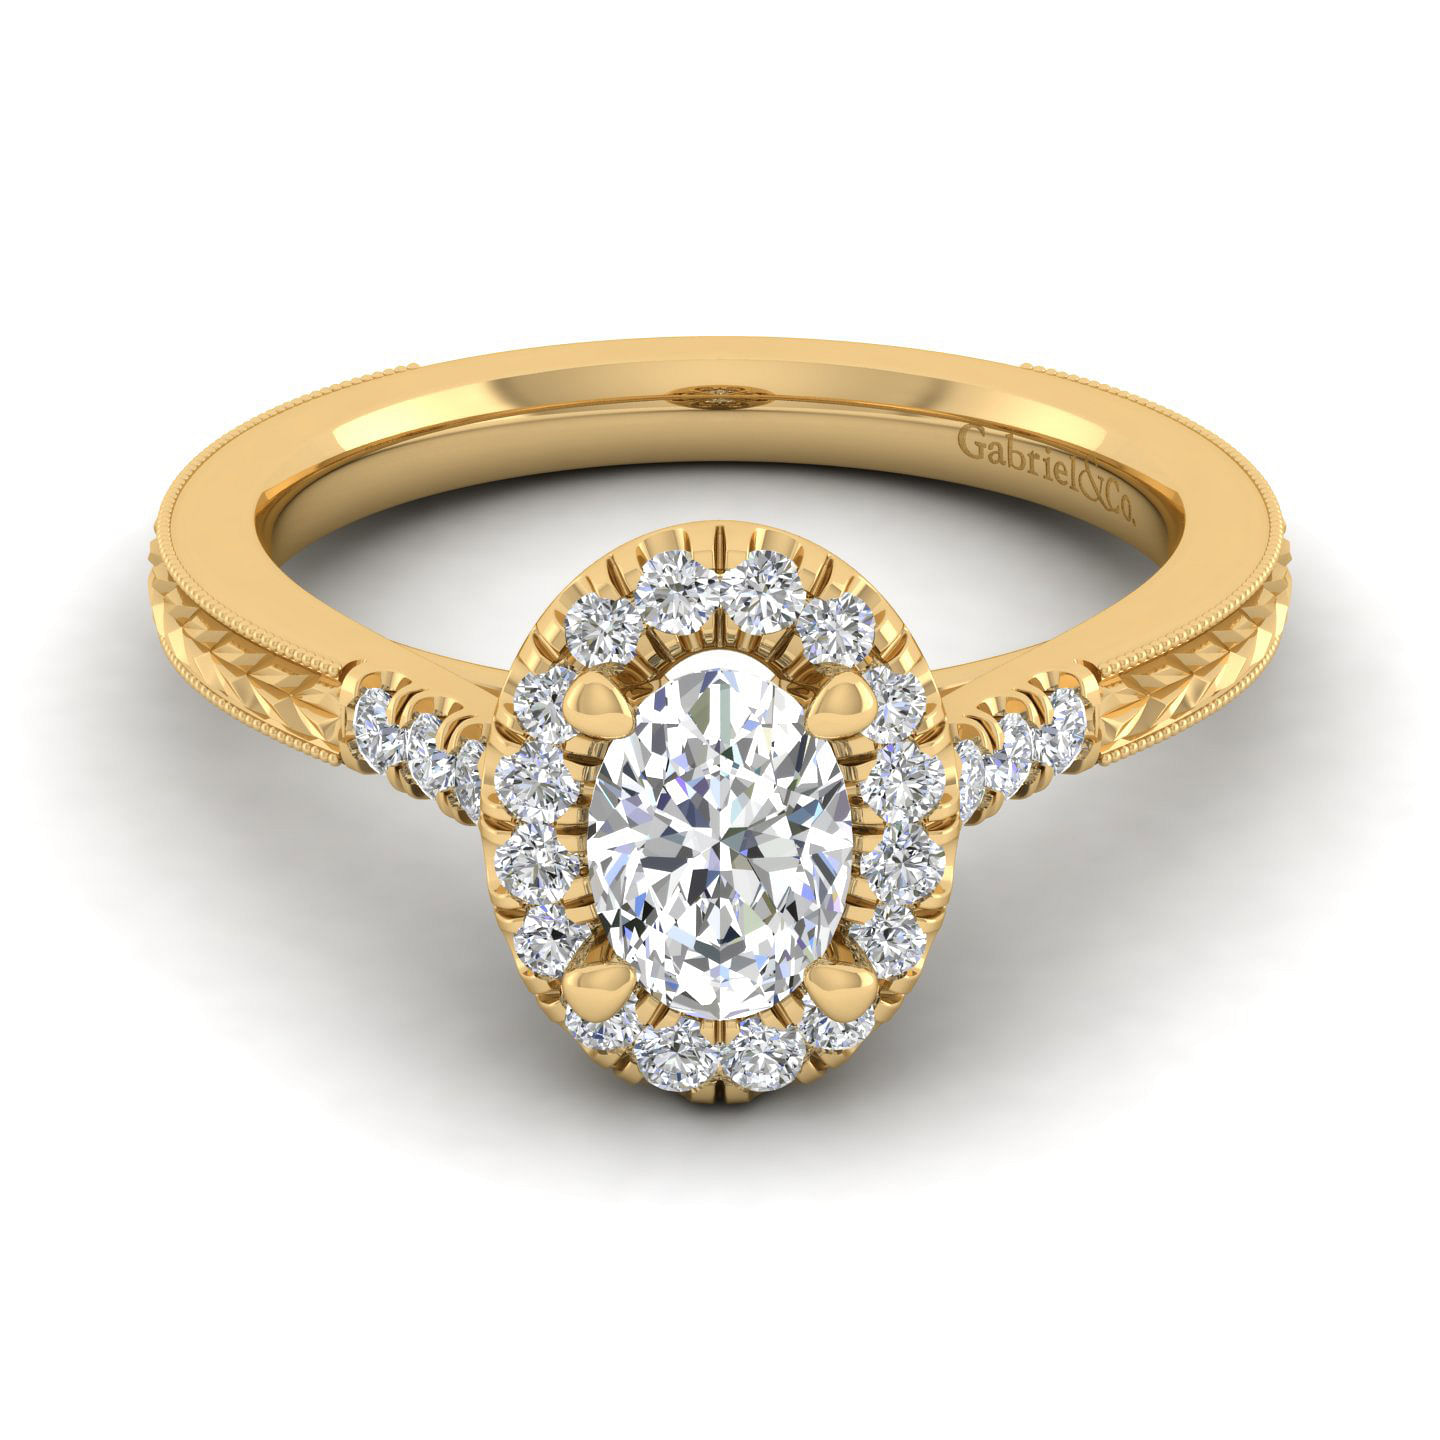 Vintage Inspired 14K Yellow Gold Oval Halo Diamond Engagement Ring